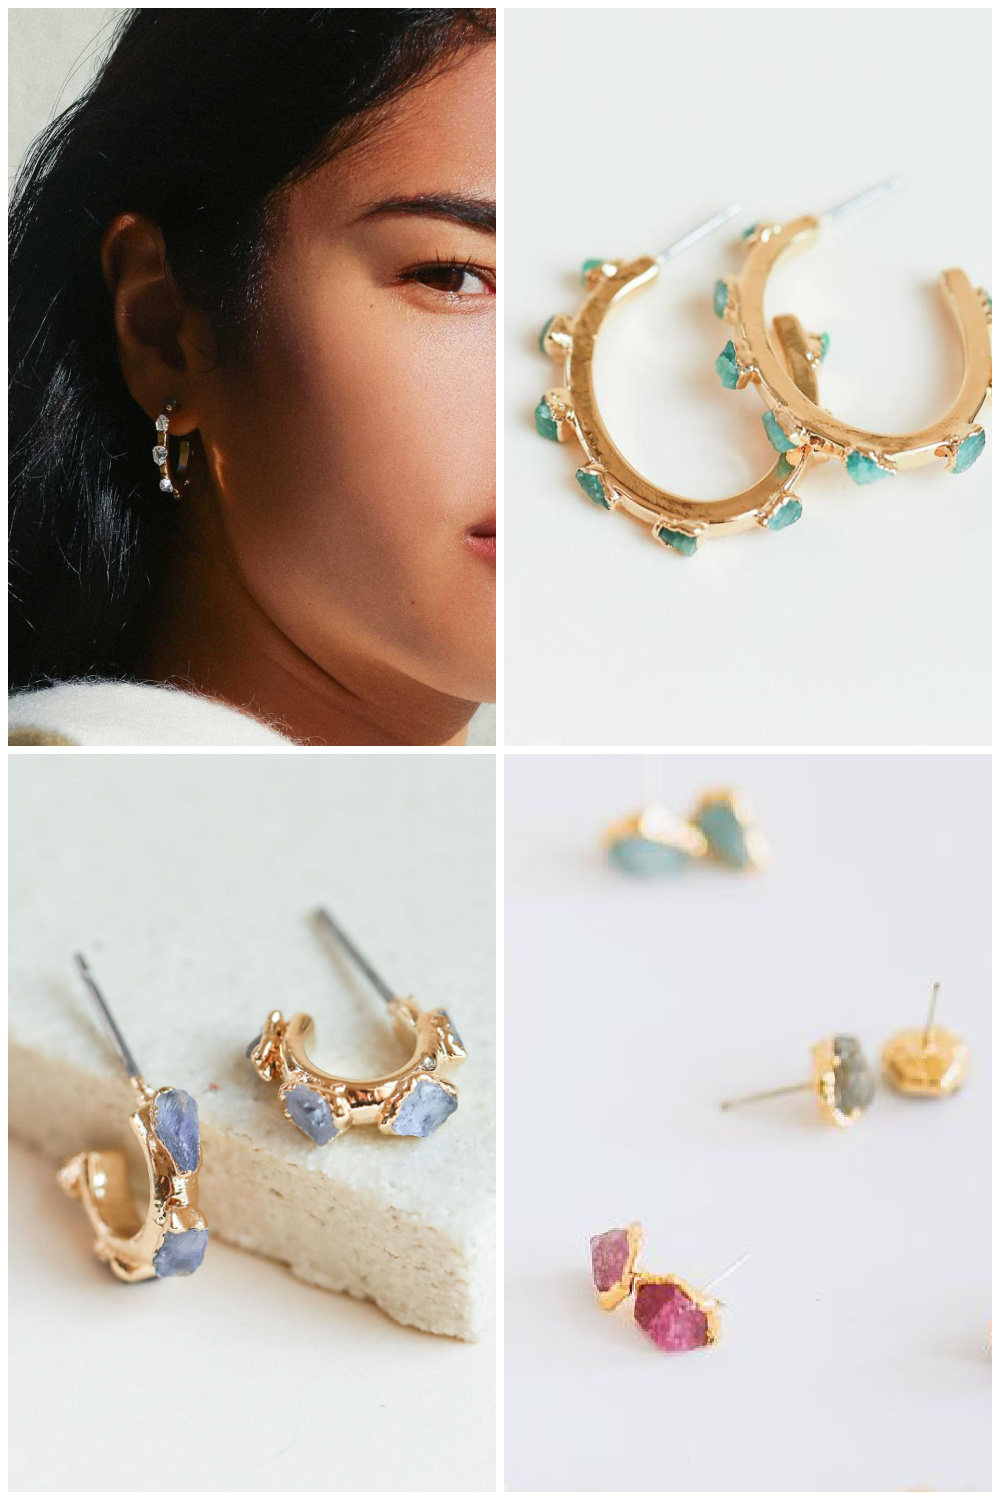 Our top 10 holiday gifts for women in 2020: Raw stone earrings from Dani Barbe | Small Business Holiday Gift Guide